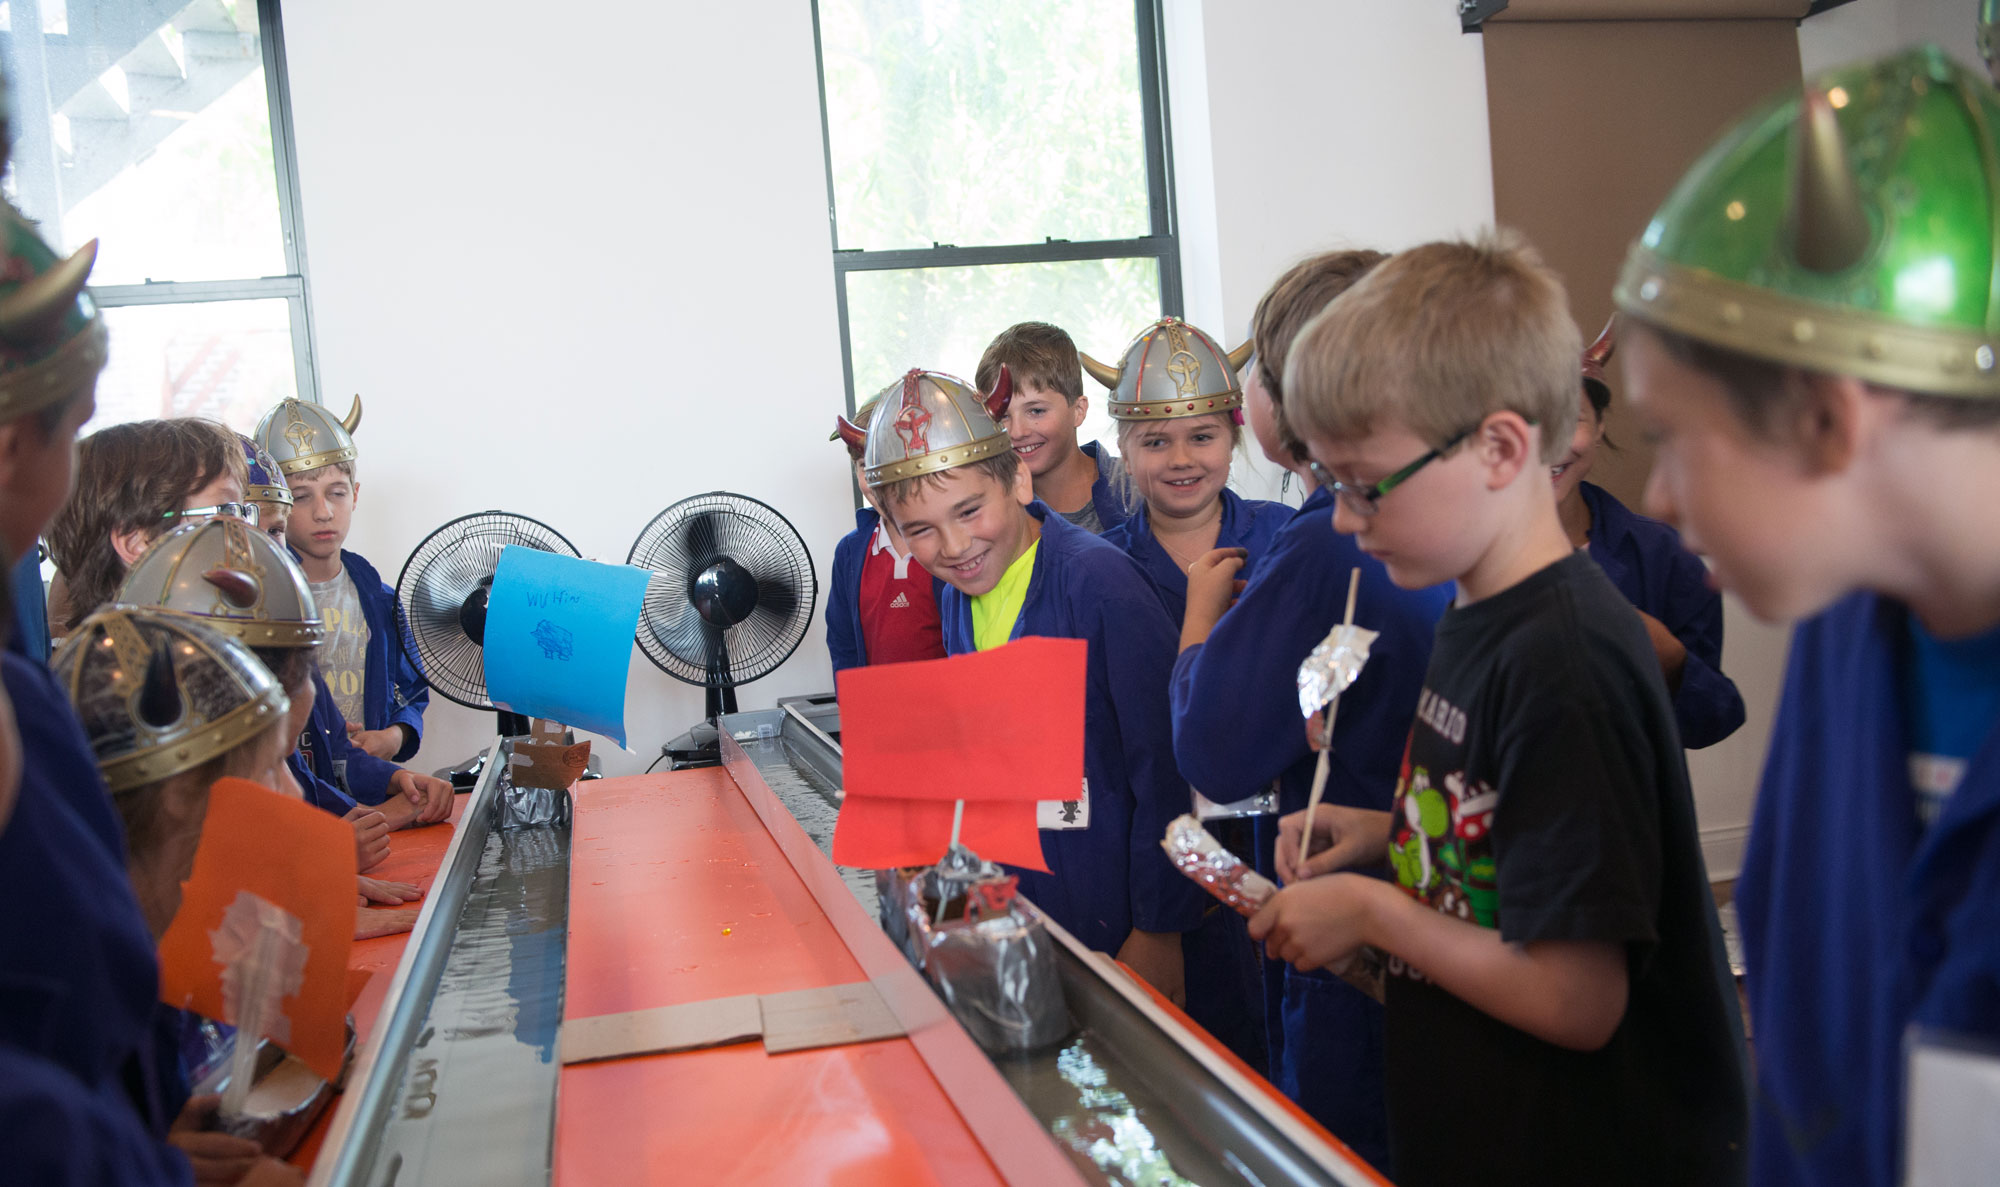 During "On Training Your Dragon" camp, students learn about the Vikings and the science behind dragons and magical species. They used Newton’s laws of motion and design-thinking to create a better Viking boat, testing it out in racing challenges against other clans.